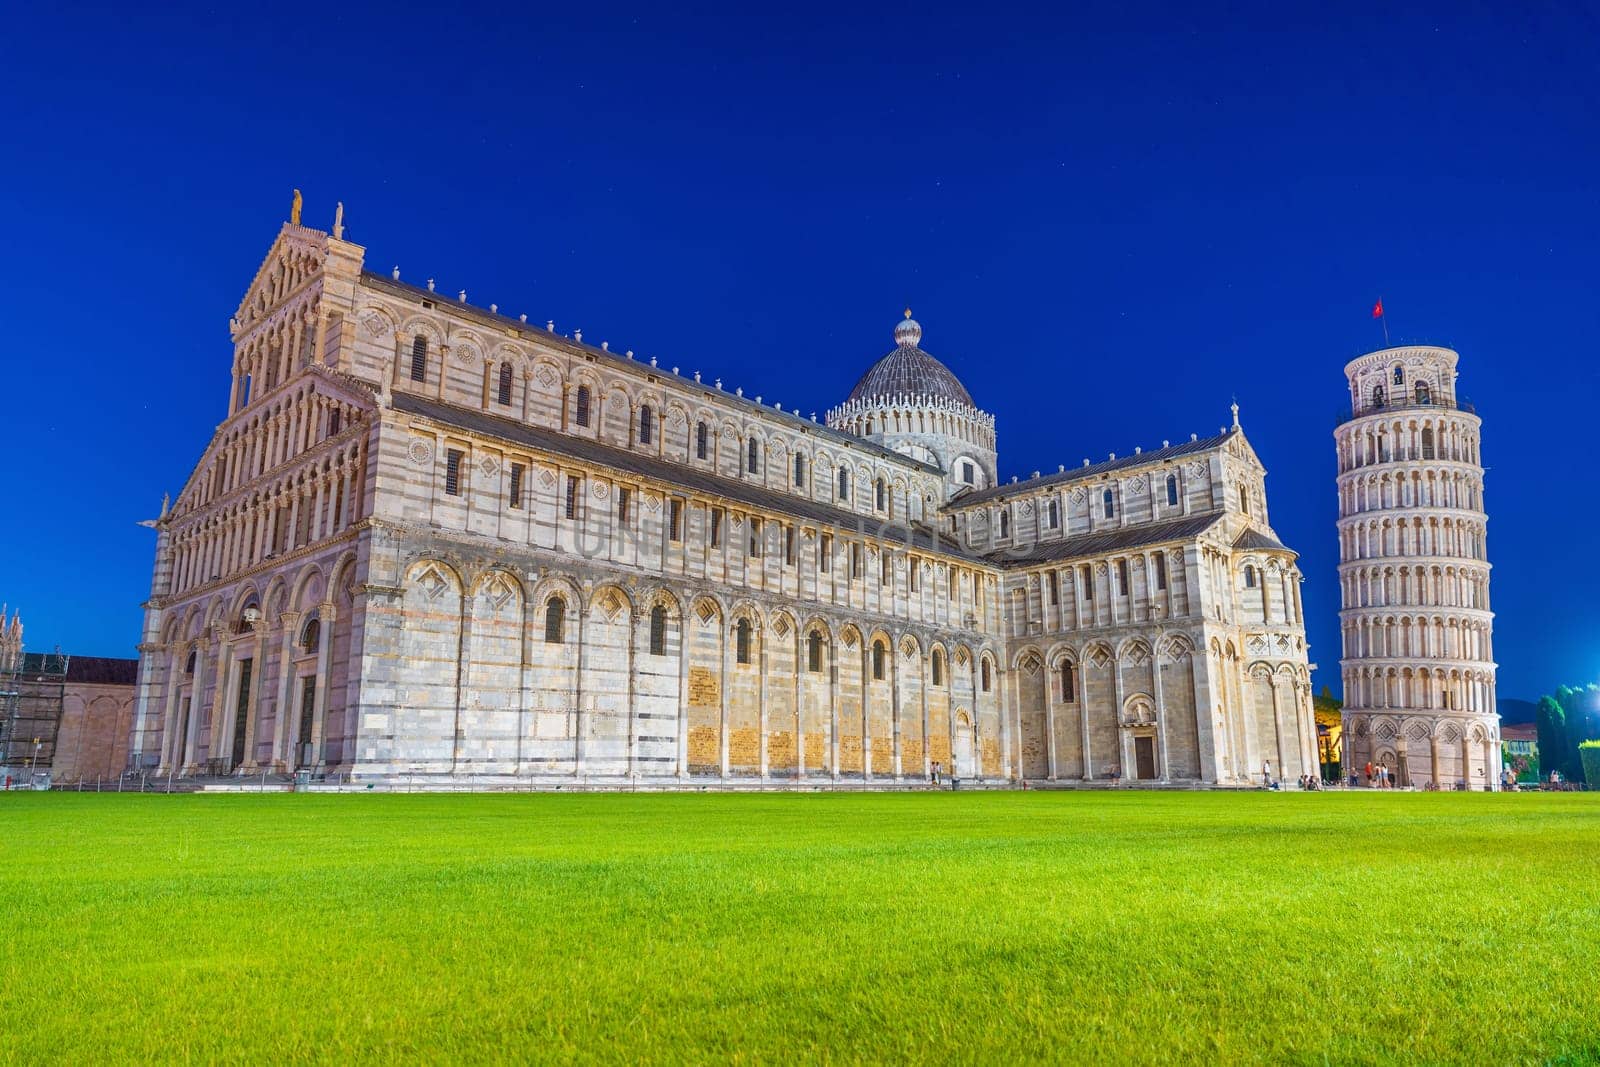 The famous Leaning Tower in Pisa, Italy by f11photo